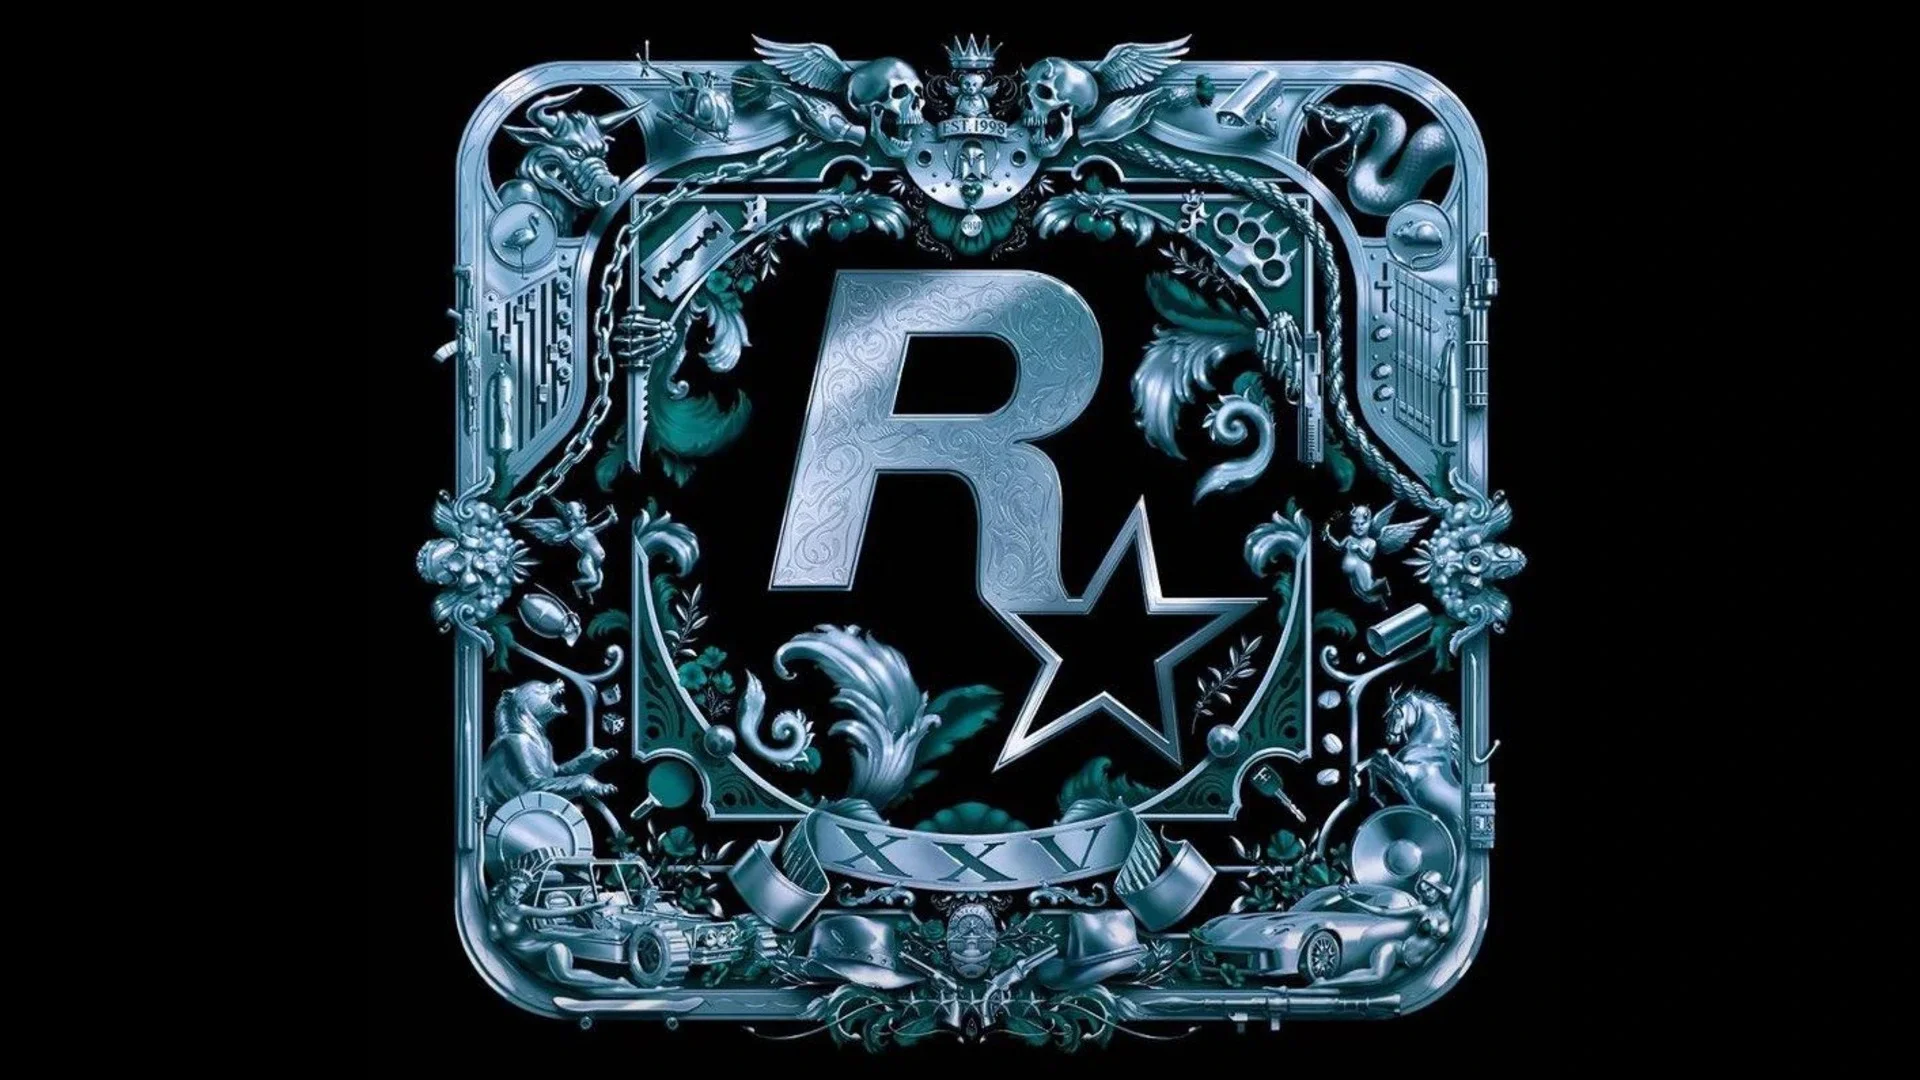 A new Rockstar Games logo with references to the studio's games has appeared online